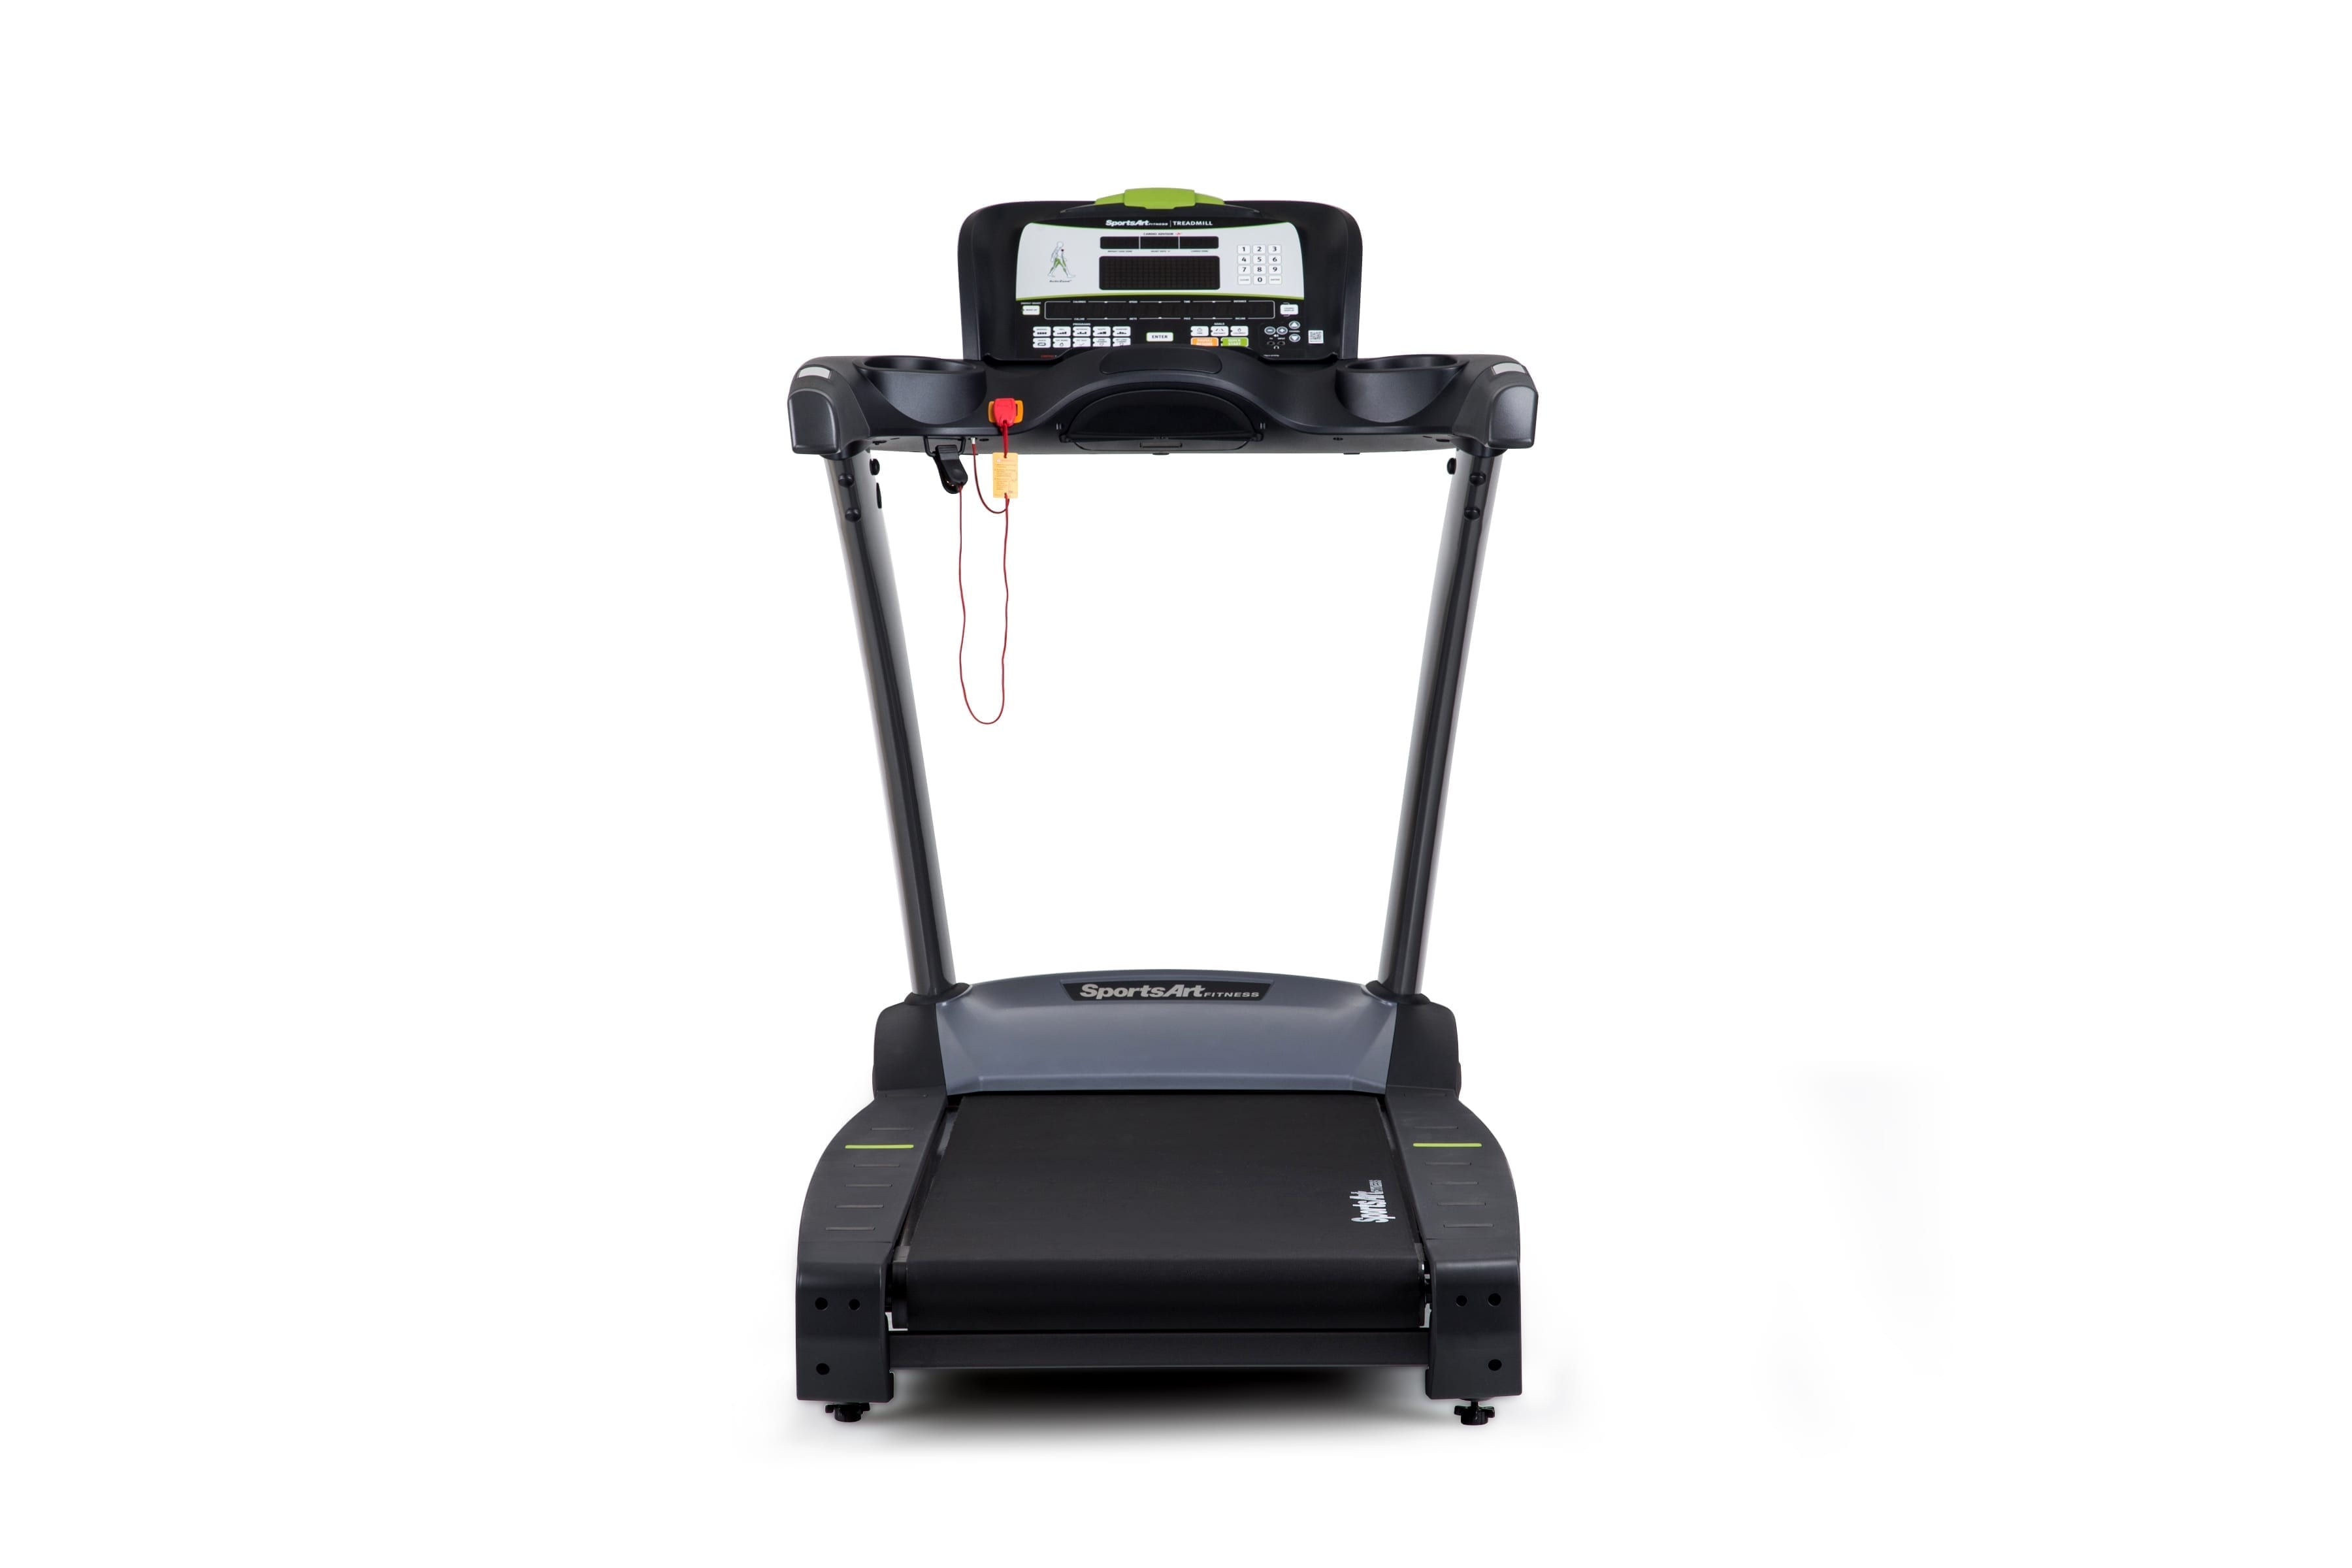 SportsArt Performance Treadmill T645L back facing side with console front face view